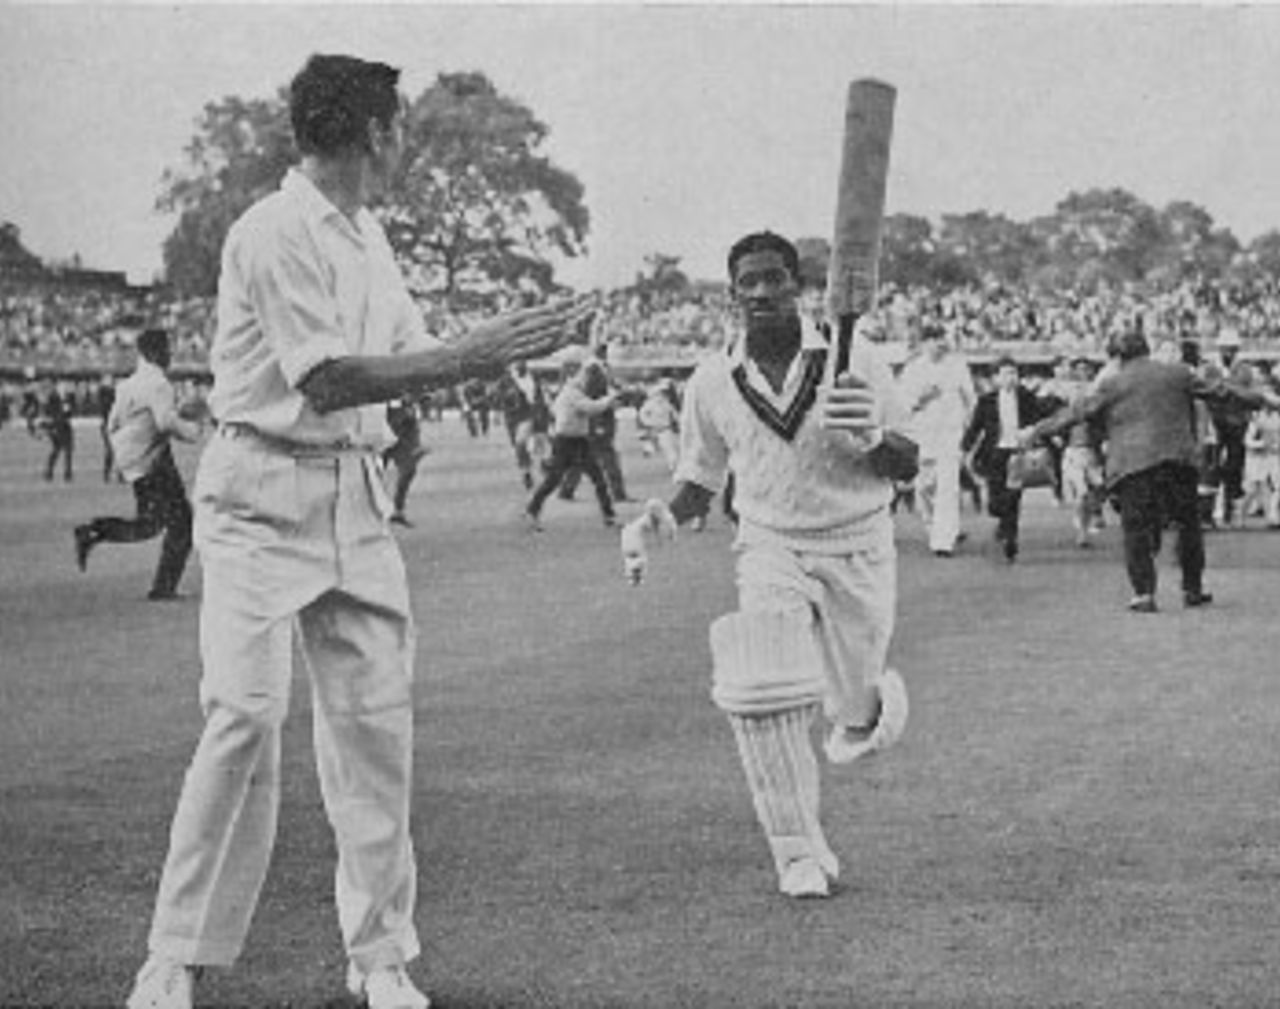 Basil Butcher leaves the field after scoring an unbeaten 129 on the third day of the 2nd Test between England and West Indies, June 22, 1963. He added only four more to his score when play resumed